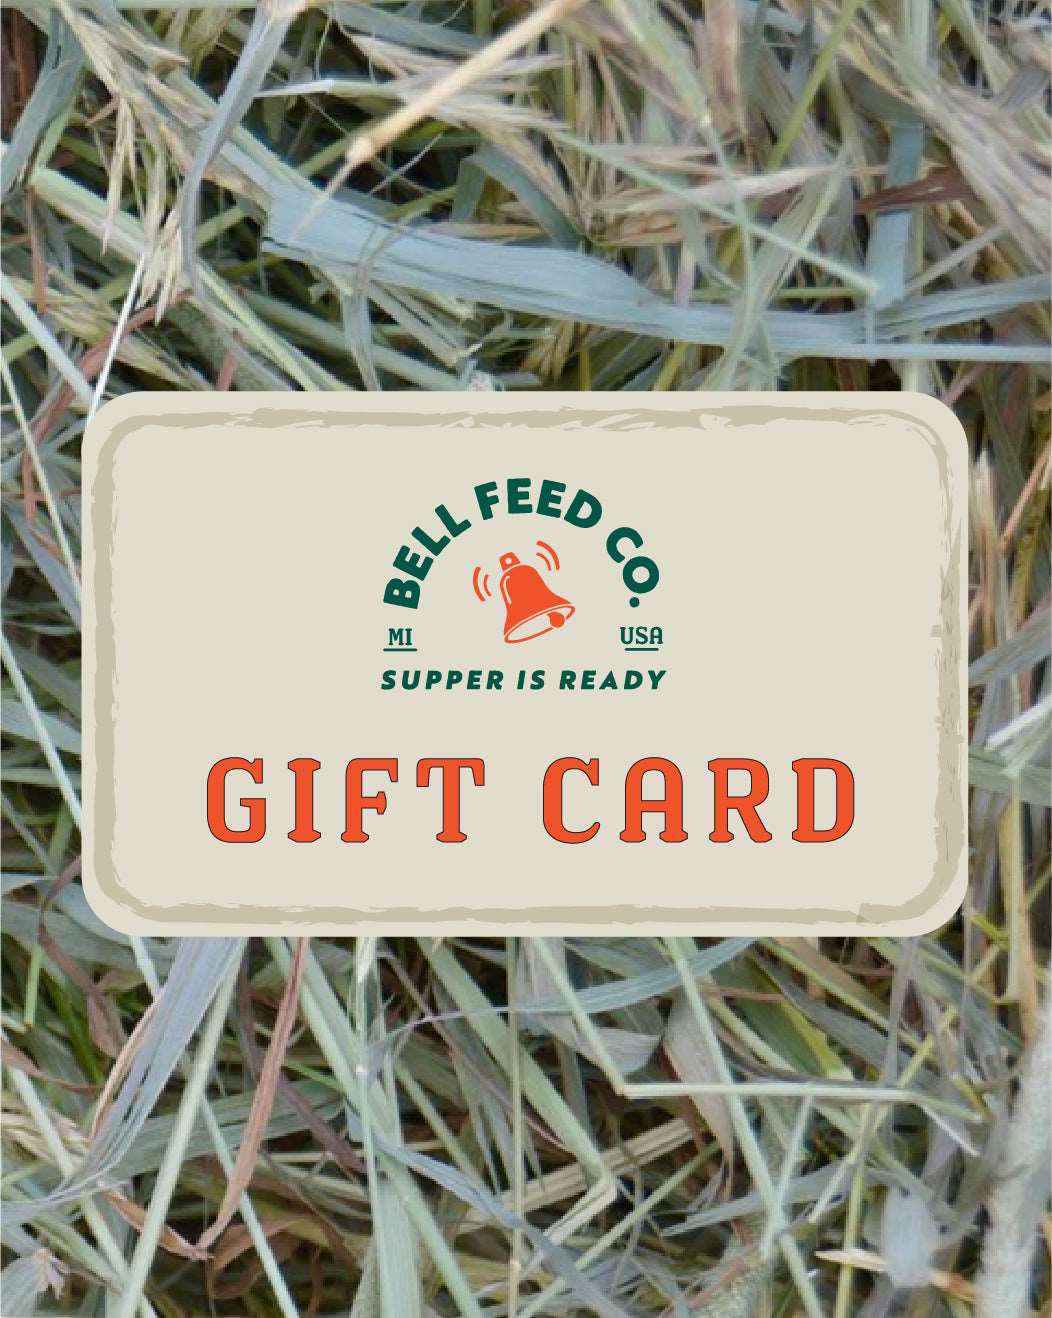 Bell Feed Company Gift Card